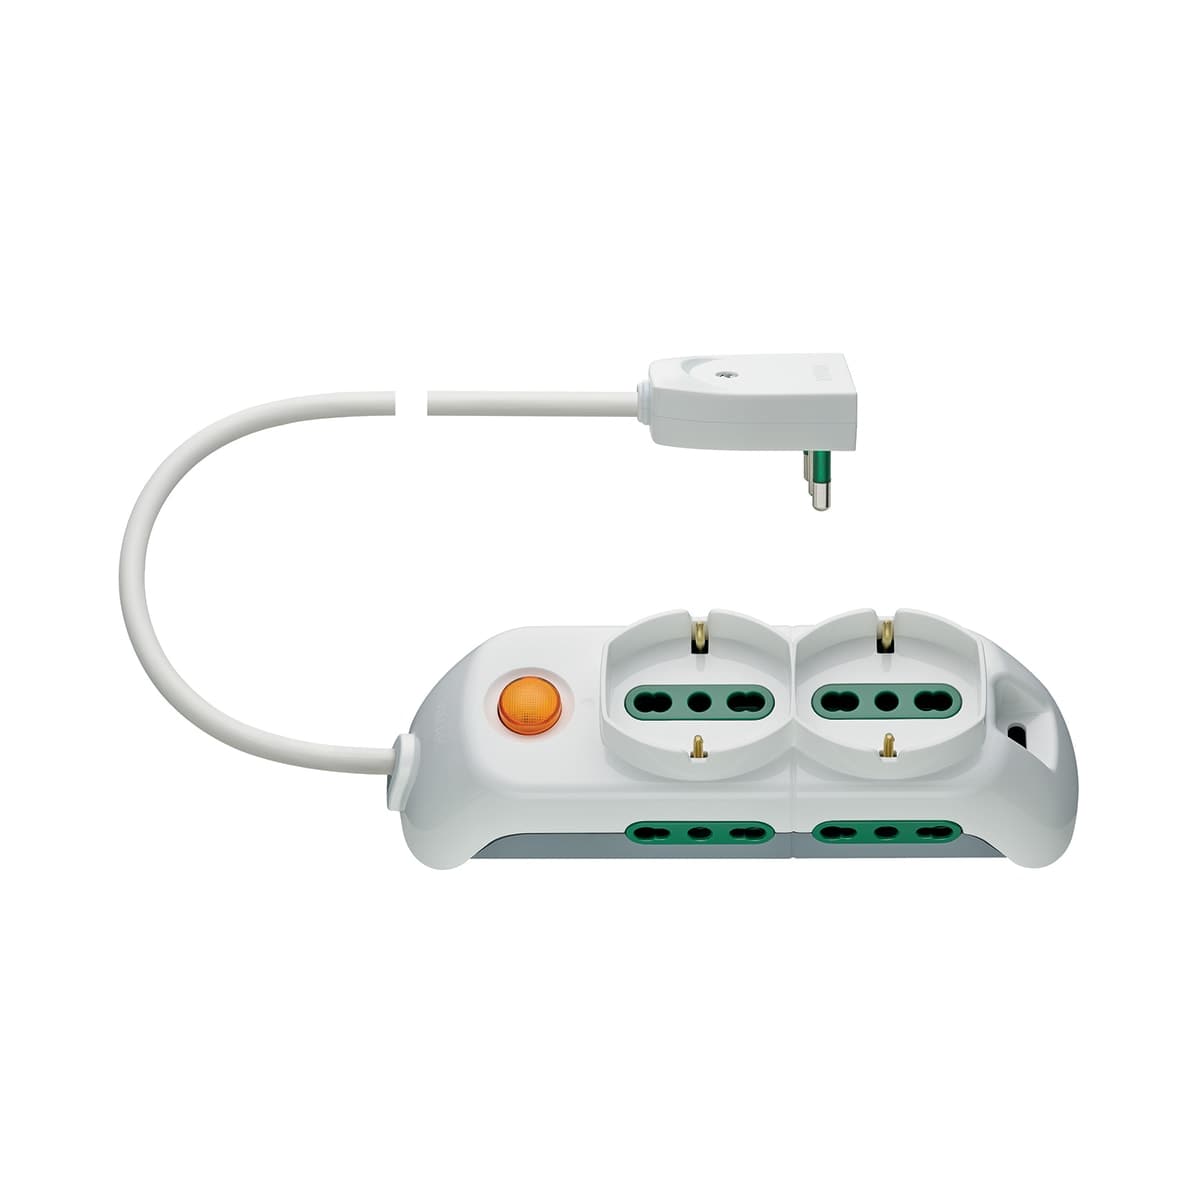 MULTISOCKET 16A PLUG 6 SOCKETS 2 UNIVERSAL 4 10/16A SWITCH CABLE 3 M WHITE - best price from Maltashopper.com BR420003241